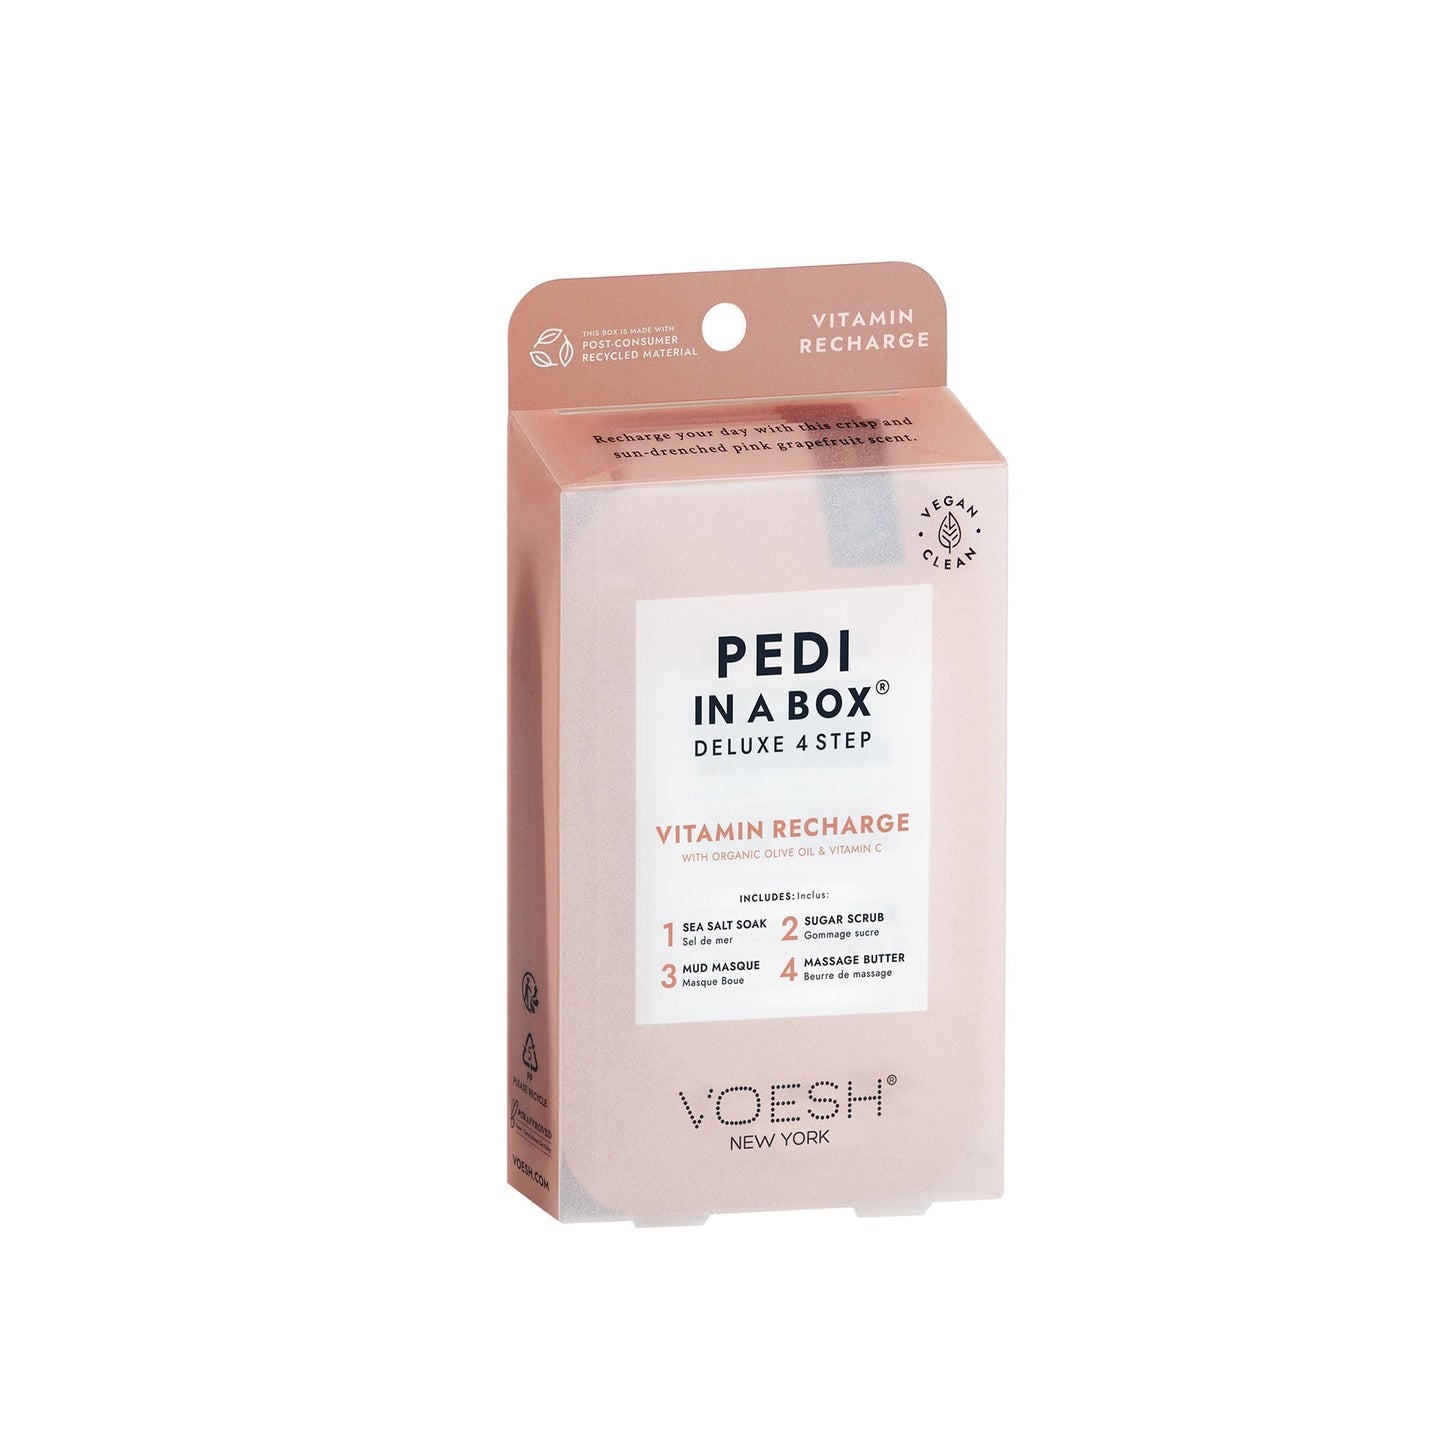 Vitamin Recharge 4 in 1 PediBox by Voesh